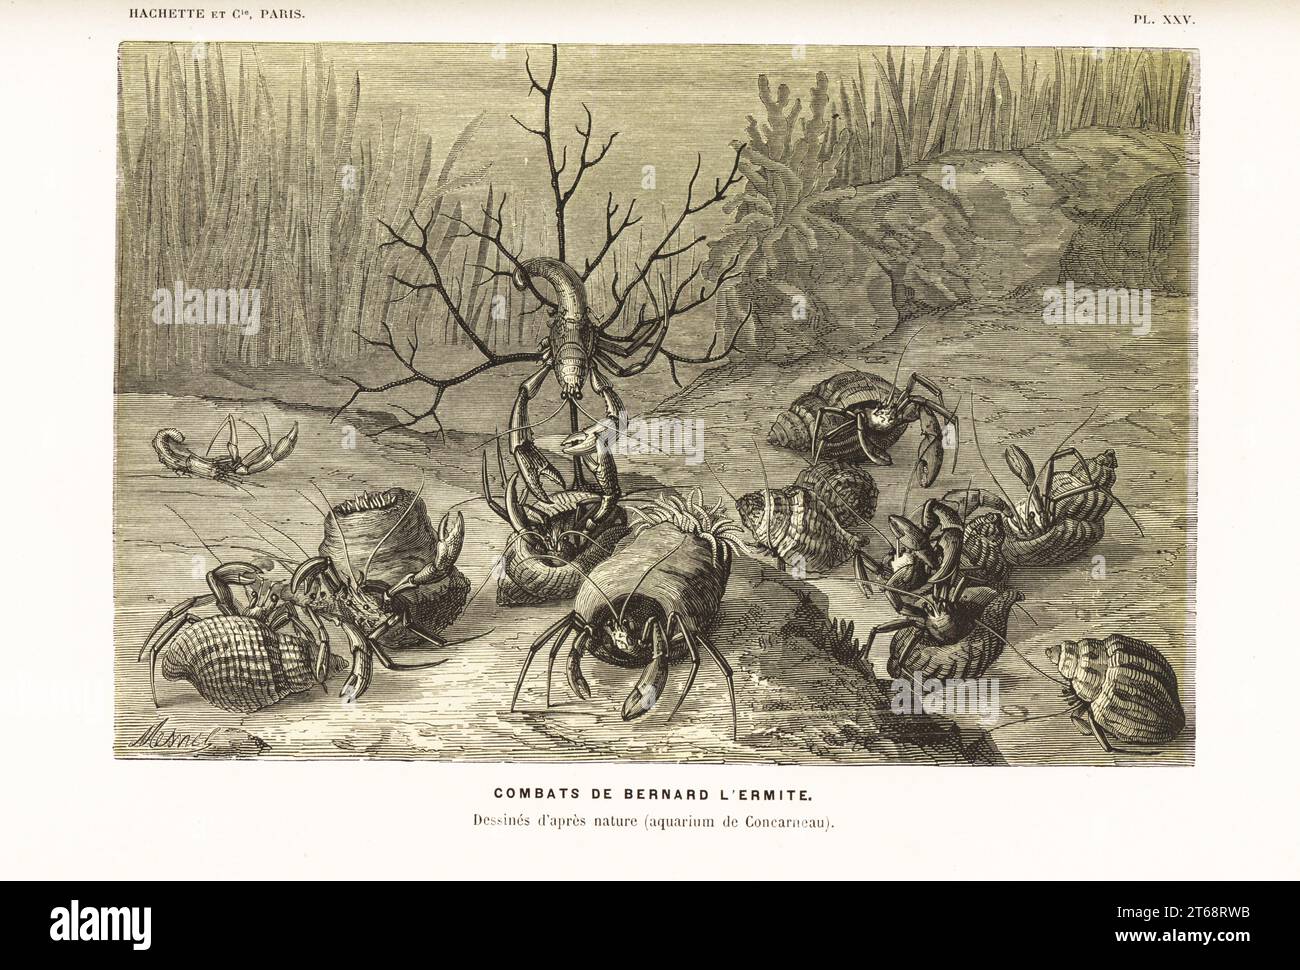 Hermit crabs, Pagurus bernhardus, fighting over shells. Drawn after nature by Olivier Fredol at Concarneau aquarium. Chromolithograph by A. Mesnel from Alfred Fredols Le Monde de la Mer, the World of the Sea, edited by Olivier Fredol, Librairie Hachette et. Cie., Paris, 1881. Alfred Fredol was the pseudonym of French zoologist and botanist Alfred Moquin-Tandon, 1804-1863. Stock Photo